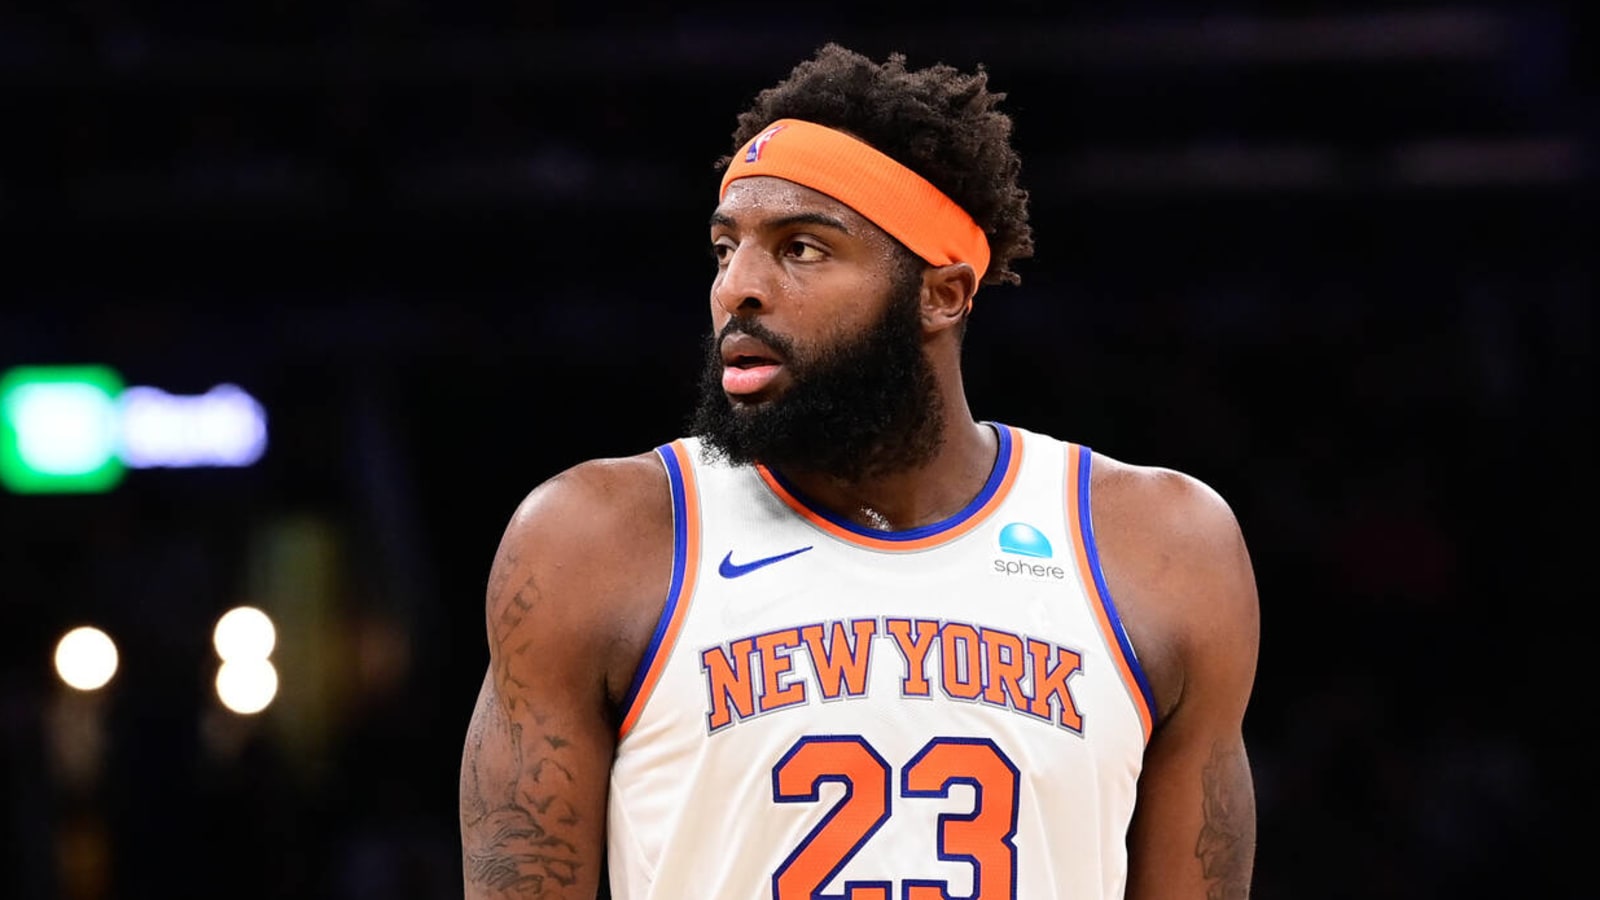 Knicks center expected to miss season remainder